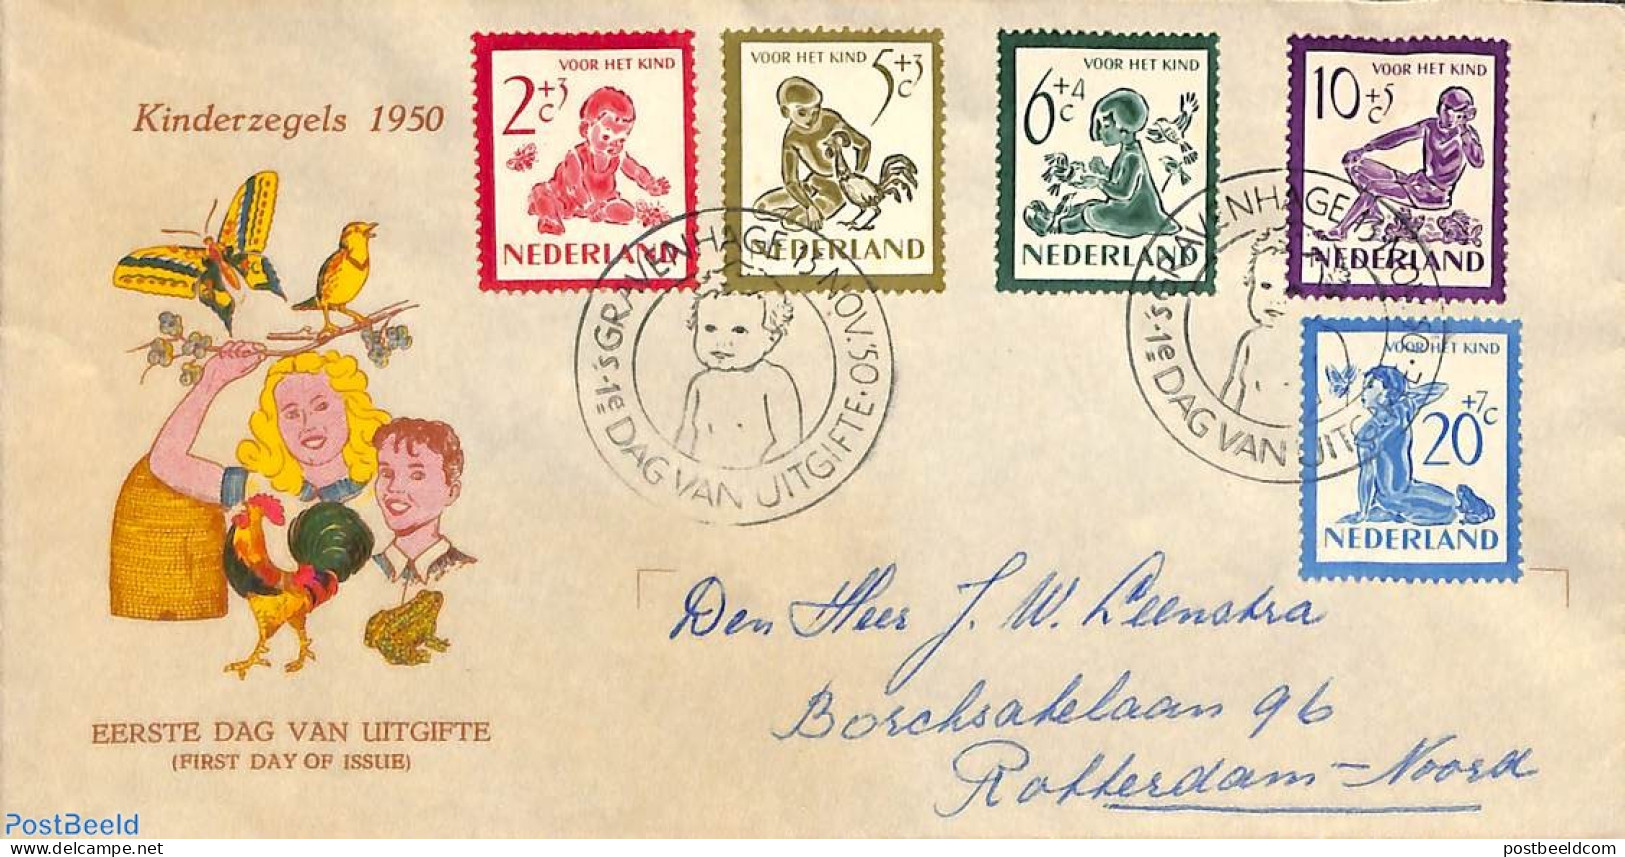 Netherlands 1950 Child Welfare 5v, FDC, Closed Flap, Written Address, First Day Cover - Storia Postale